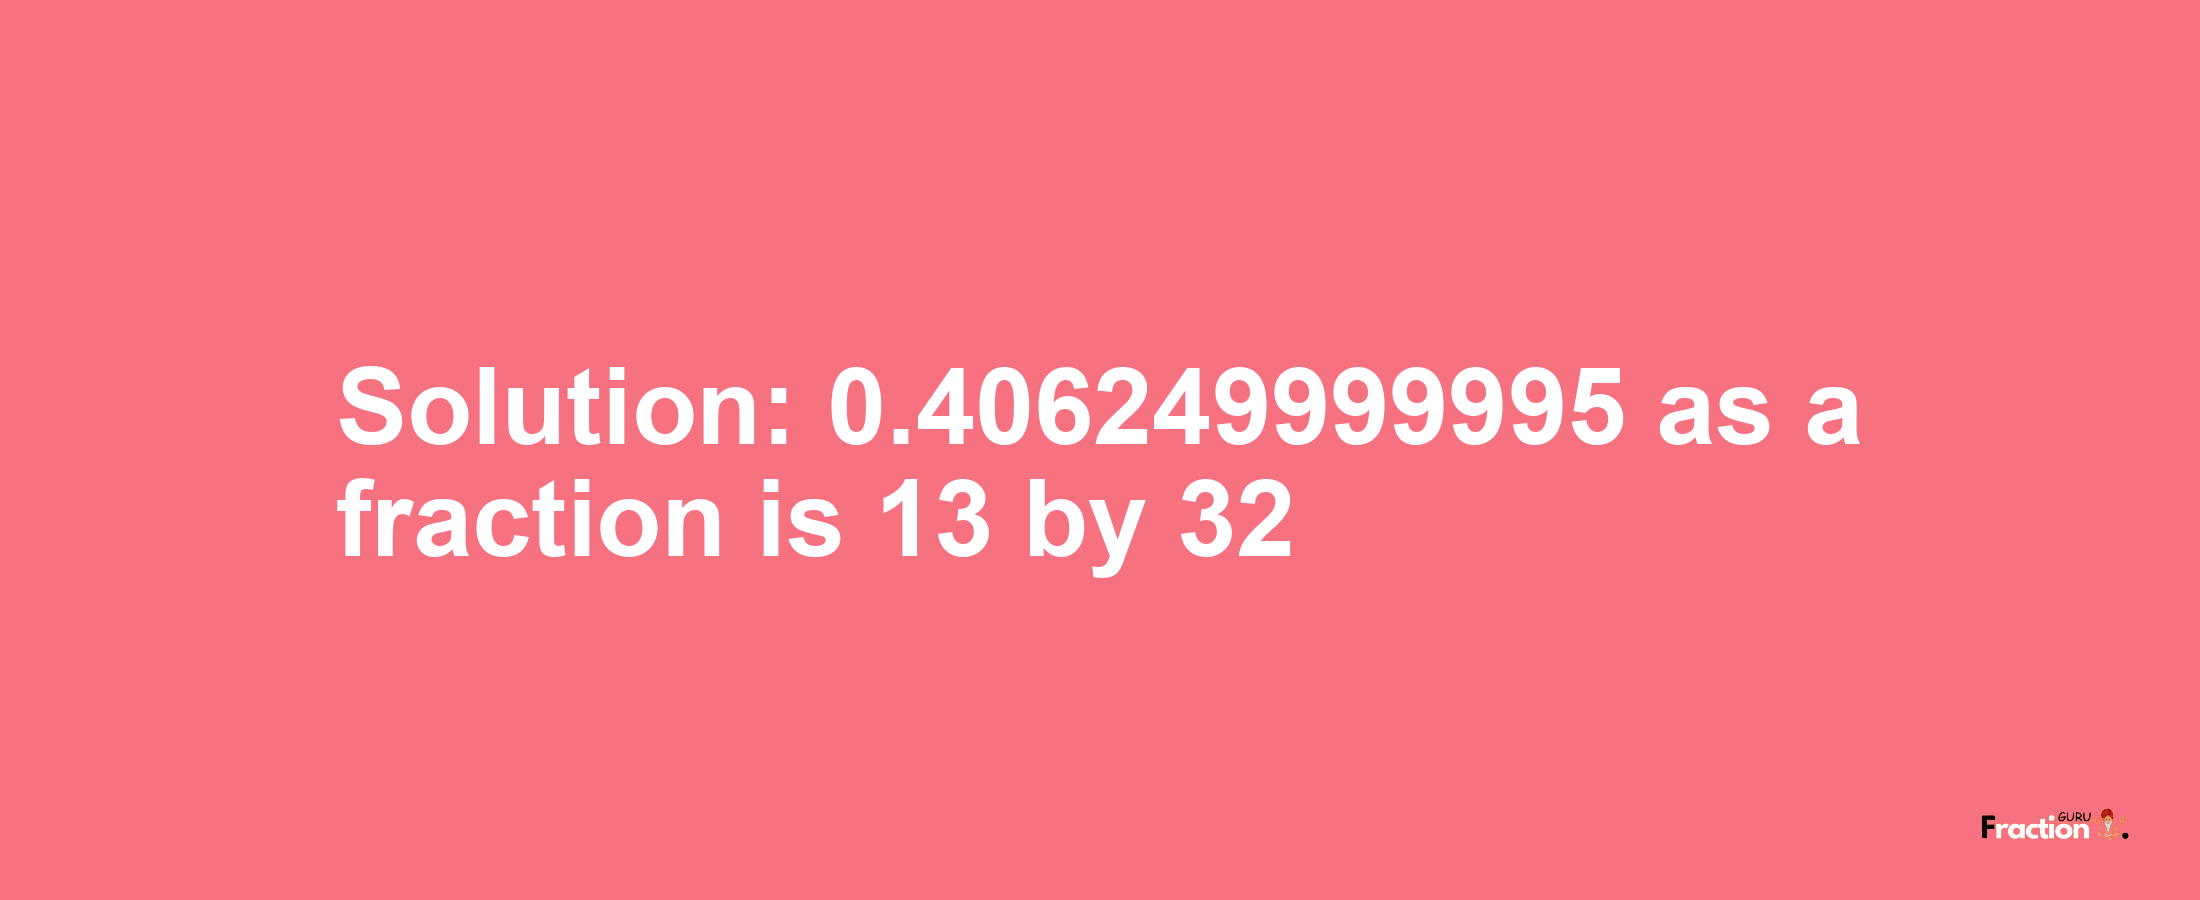 Solution:0.406249999995 as a fraction is 13/32